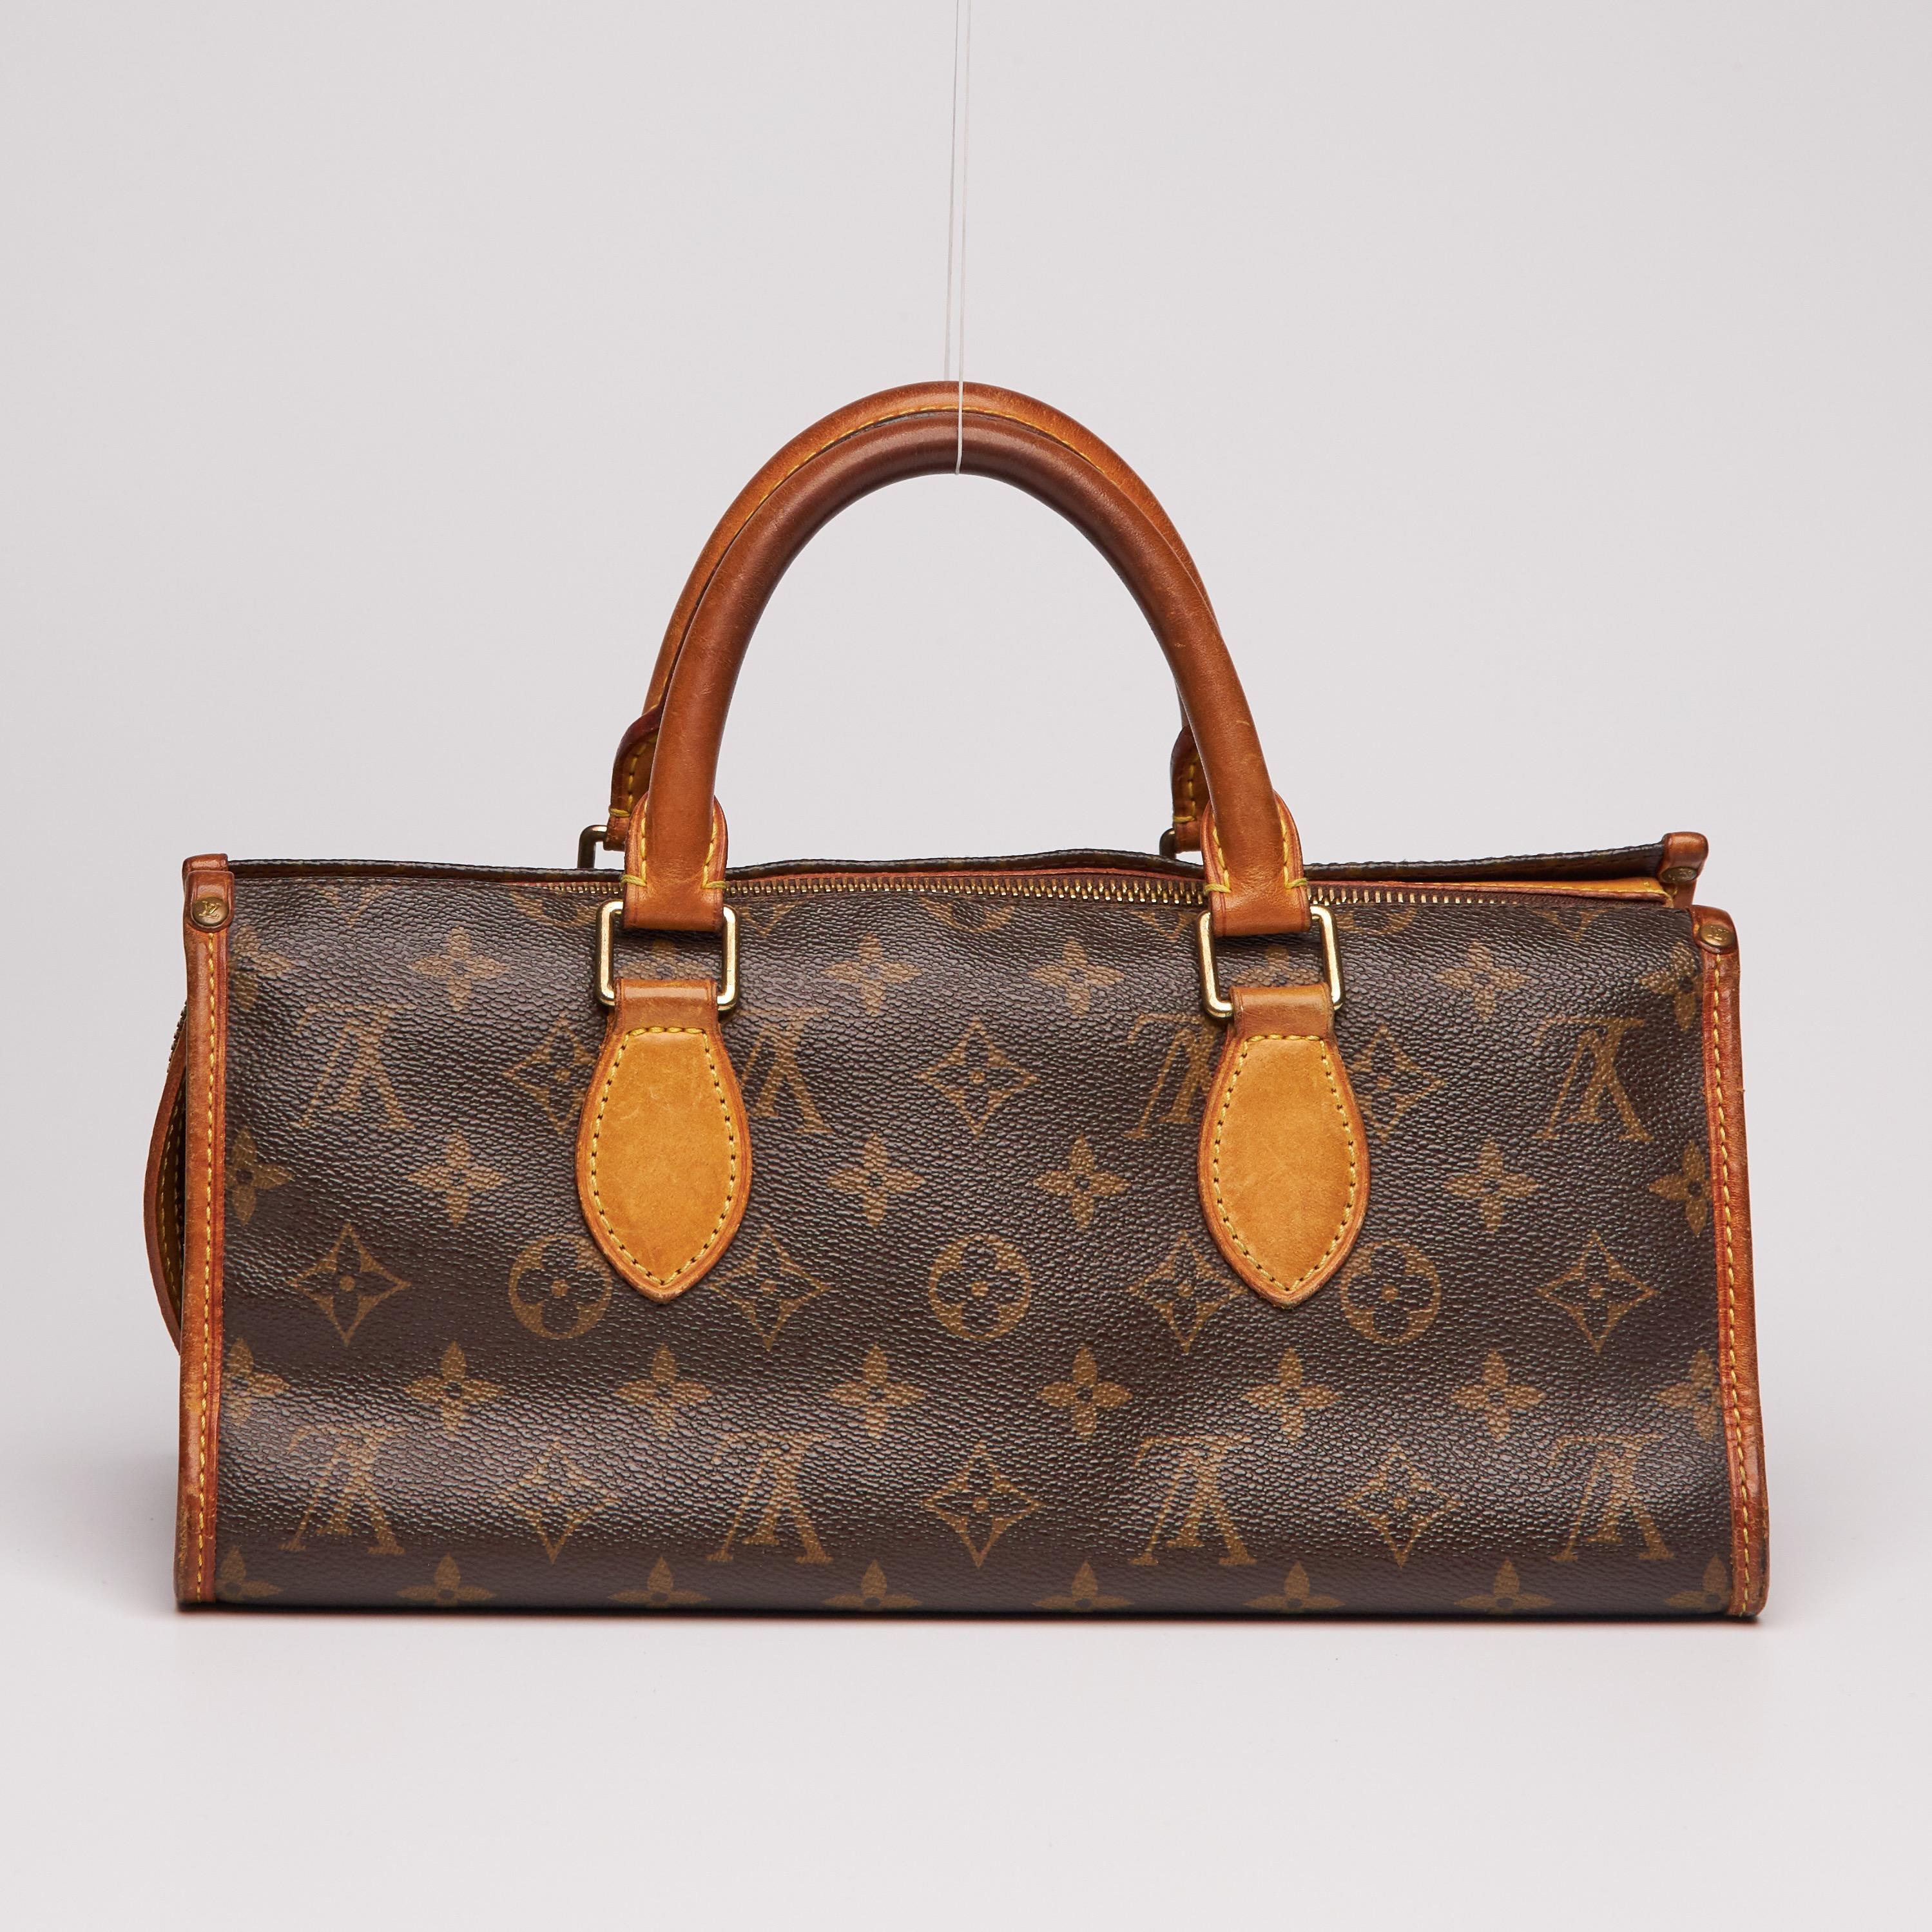 
The triangle shaped handbag is constructed of traditional Louis Vuitton monogram coated canvas trimmed with vachetta cowhide leather at the side edges and smooth rolled leather top handles. The bag has brass hardware including an overextended brass